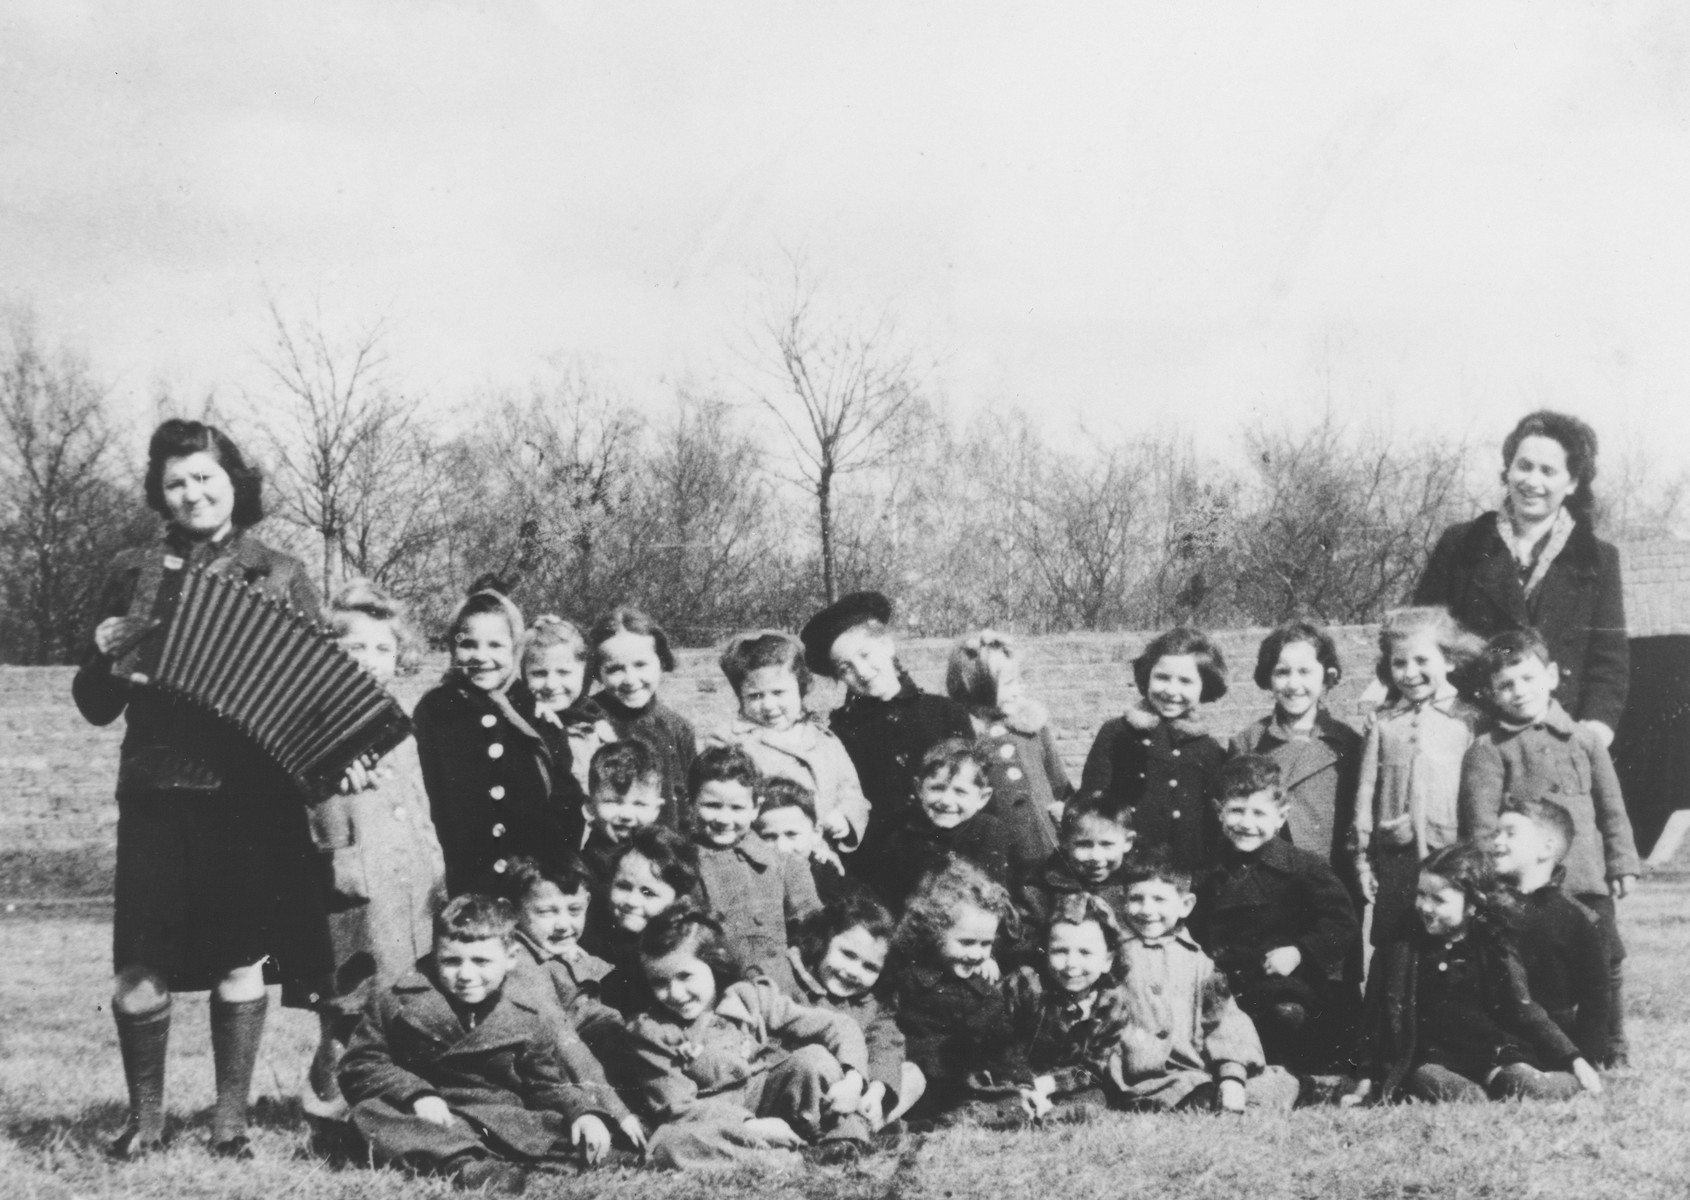 Preschoolers in the Mariendorf displaced persons camp enjoy the music of an accordian.

Those pictured include Maya Rosenfeld (later Freed Brown).